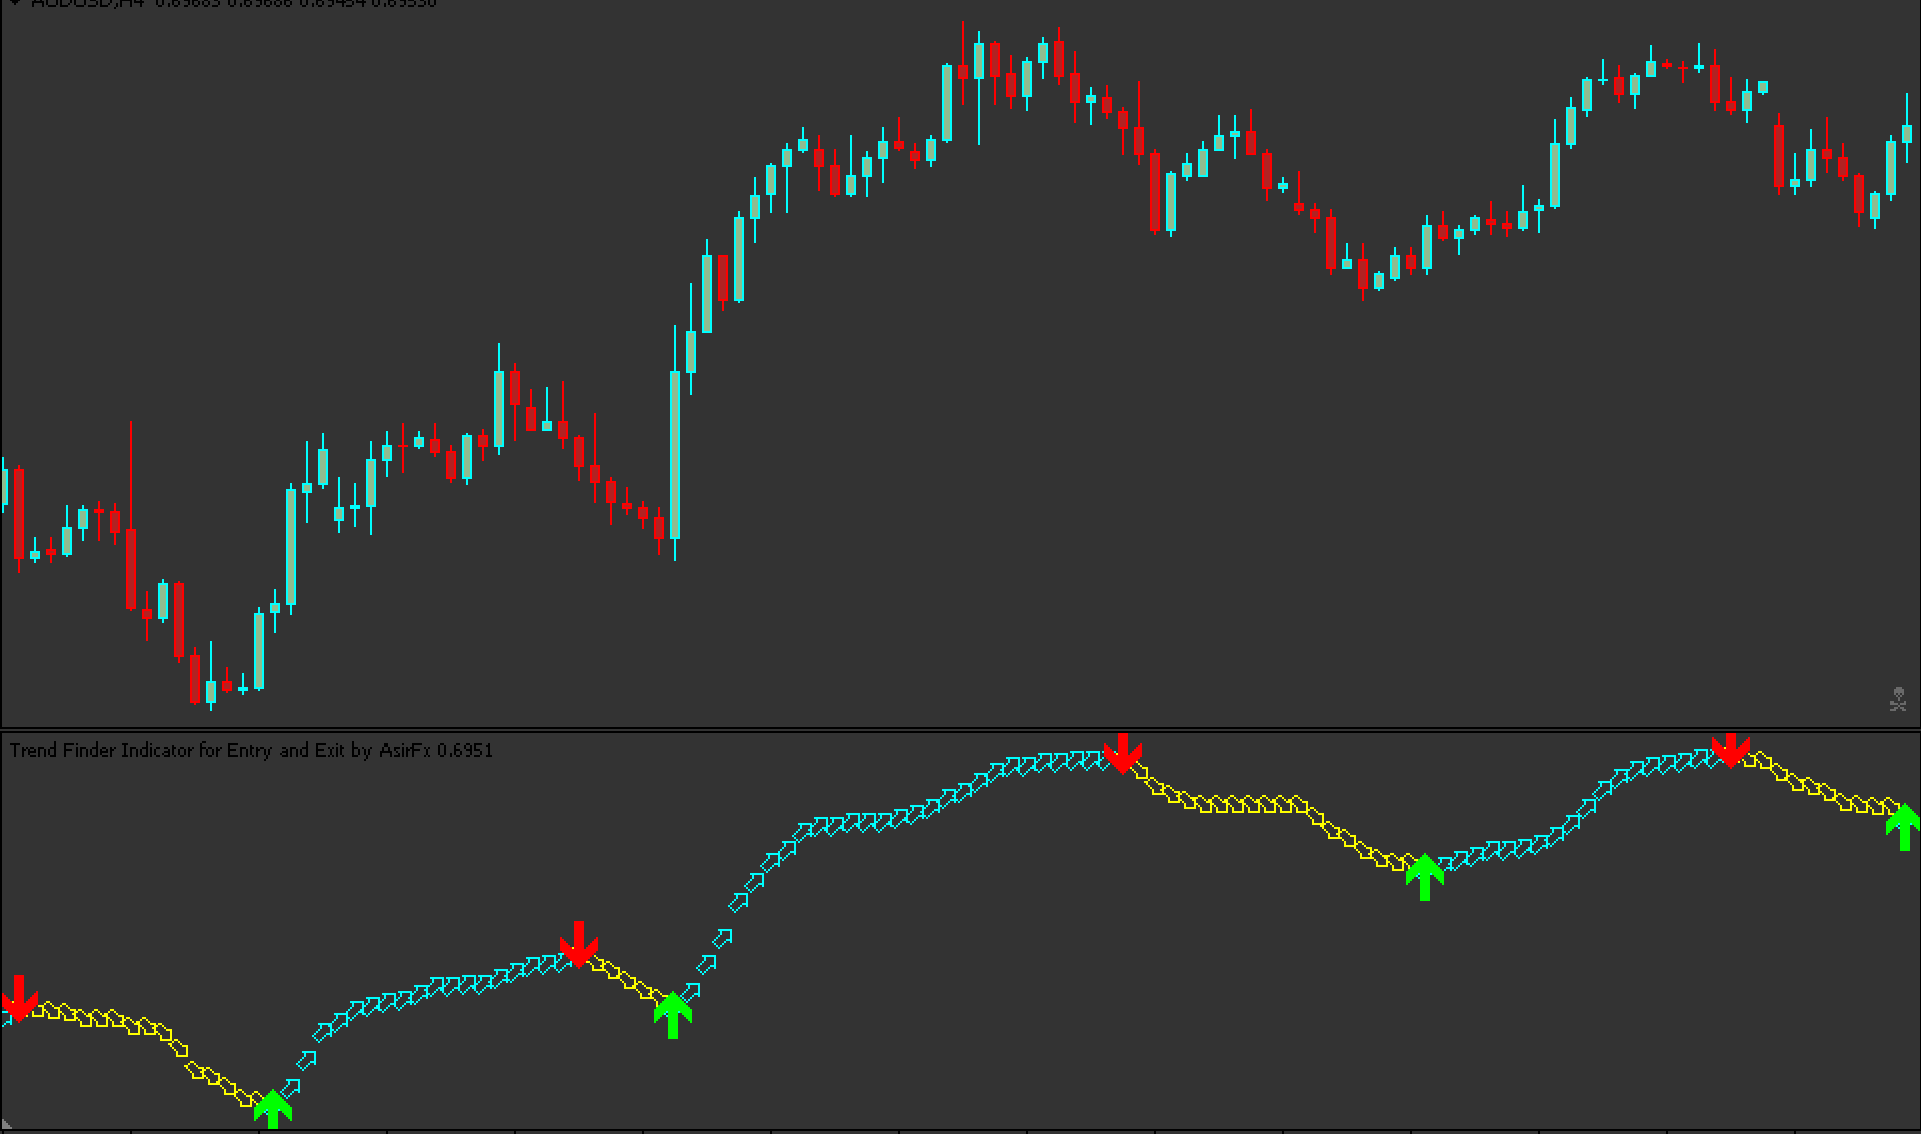 SFI Indicator Entry and Exit